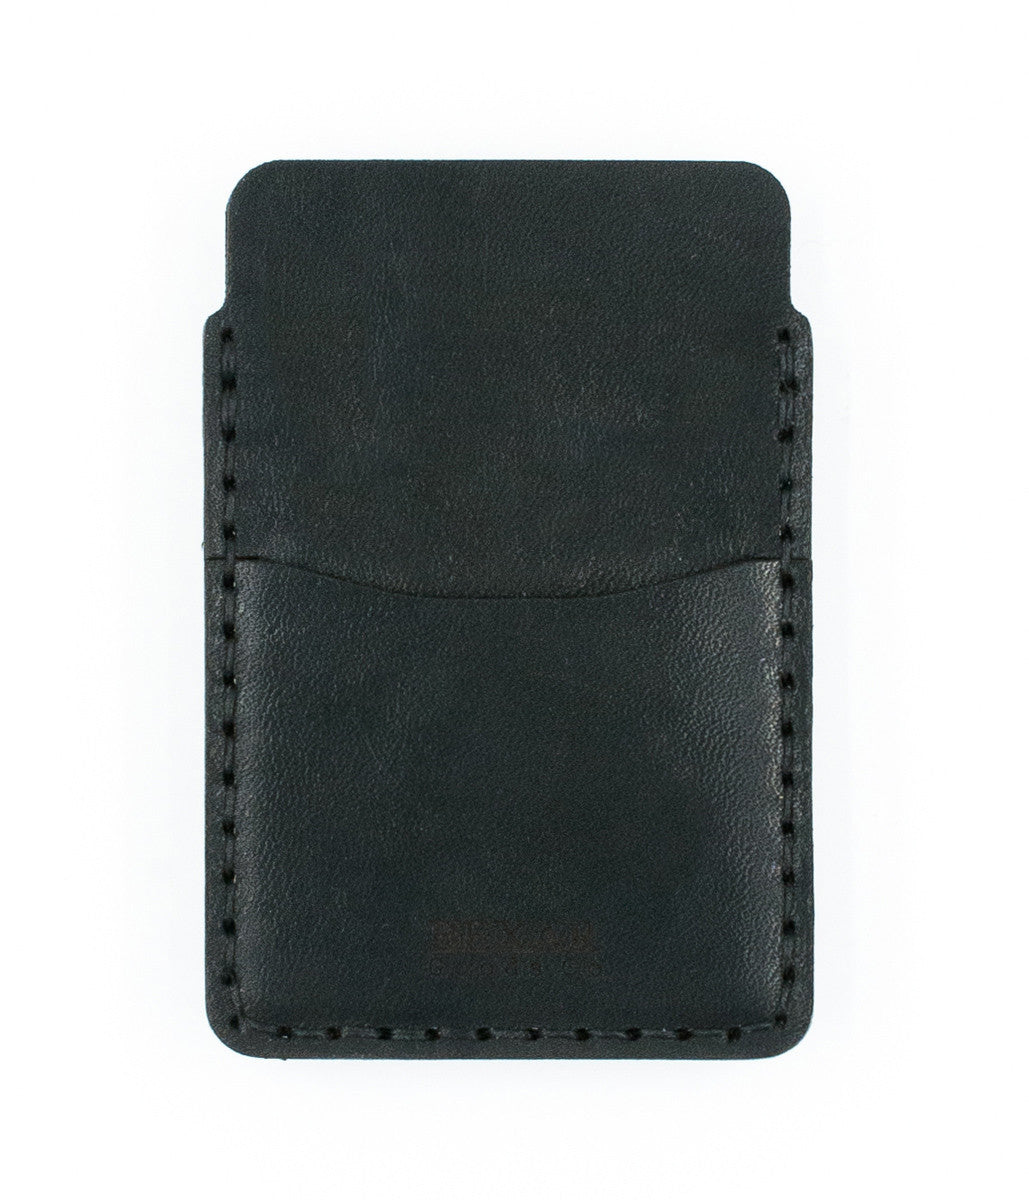 black leather card sleeve with outer sleeve wallet